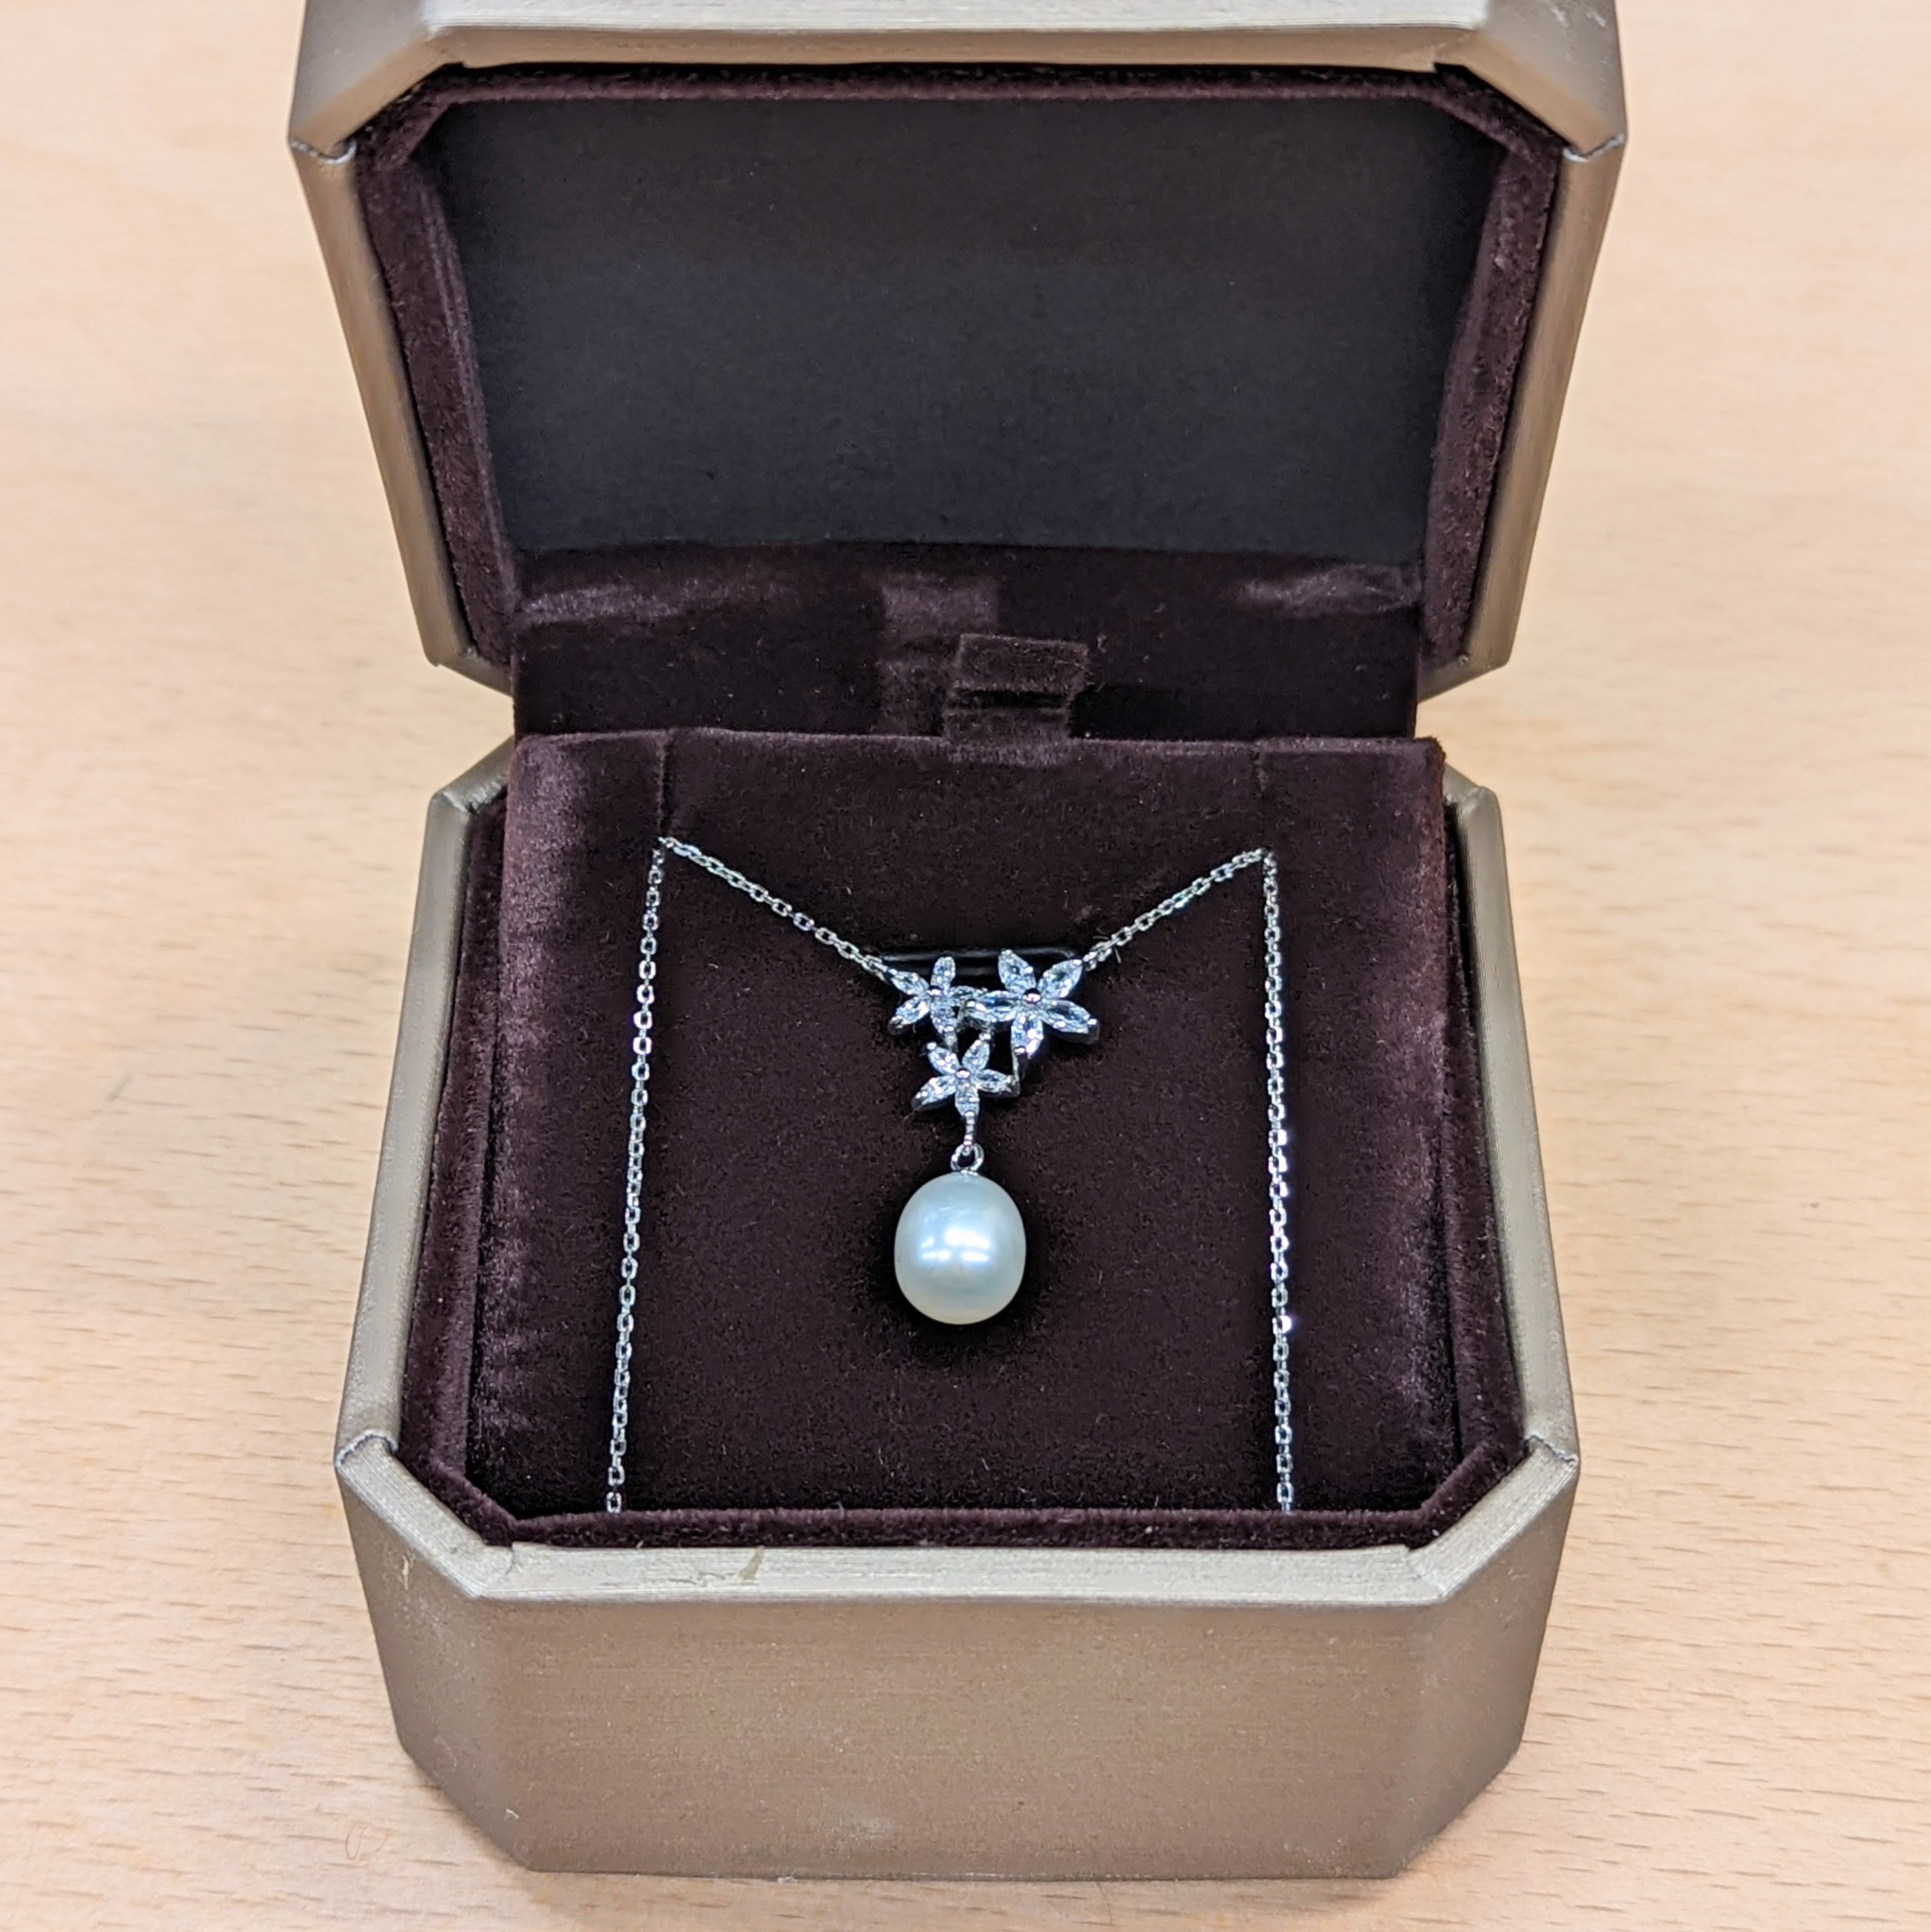 Necklace in box, front view